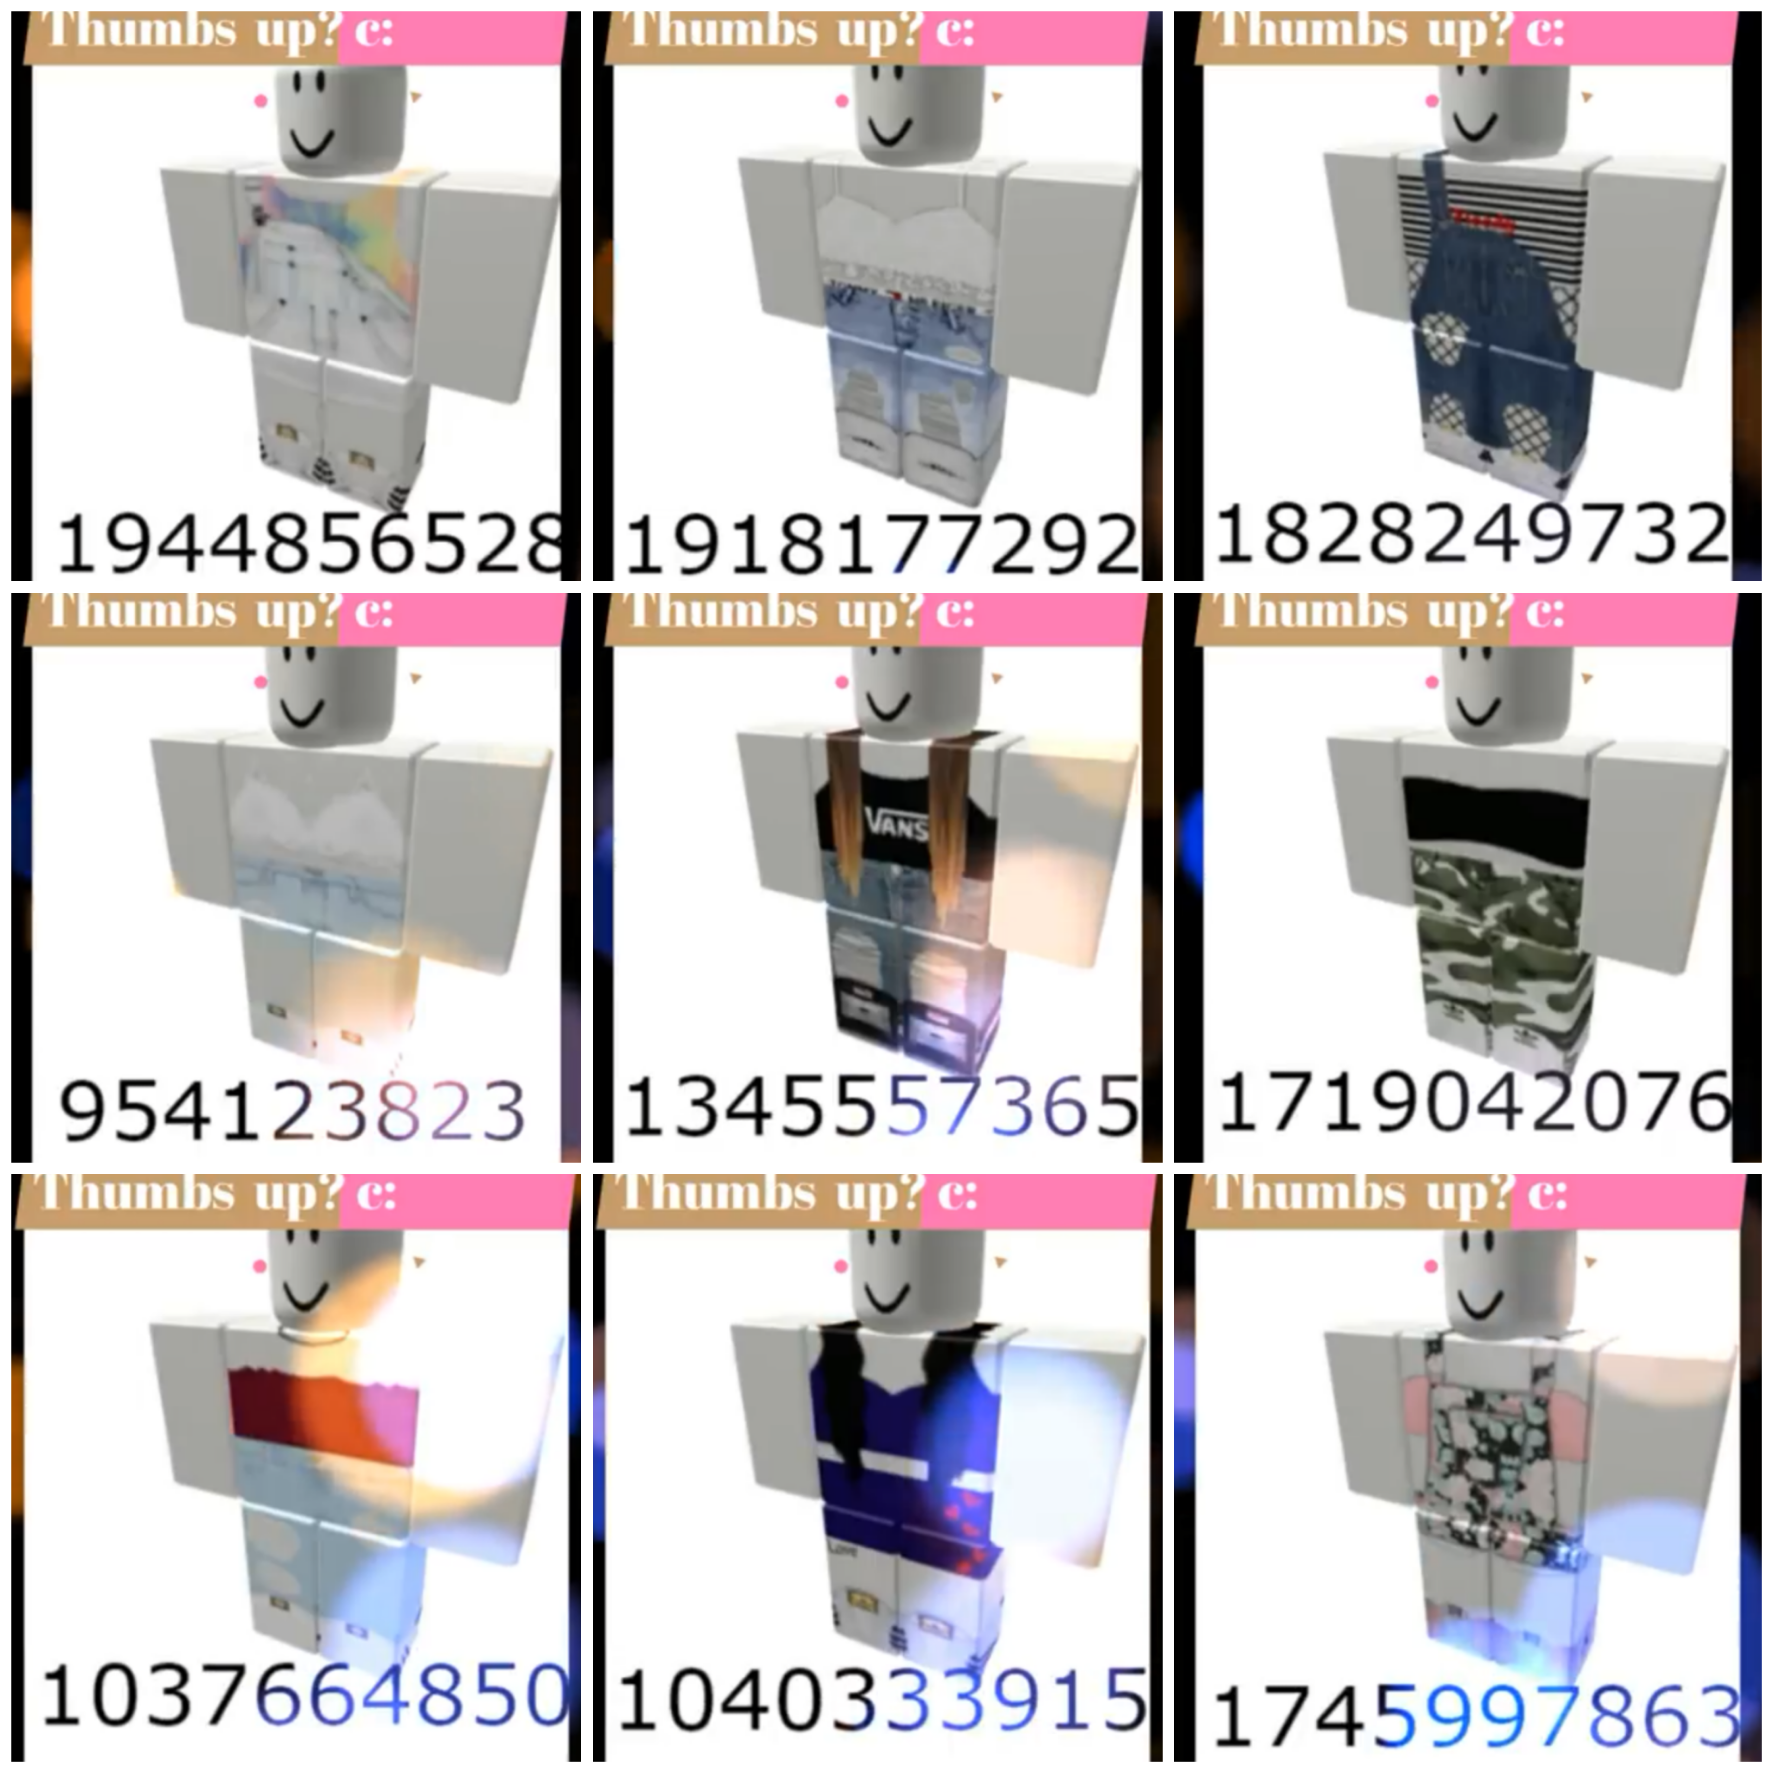 Roblox Cute Faces For Girls Codes